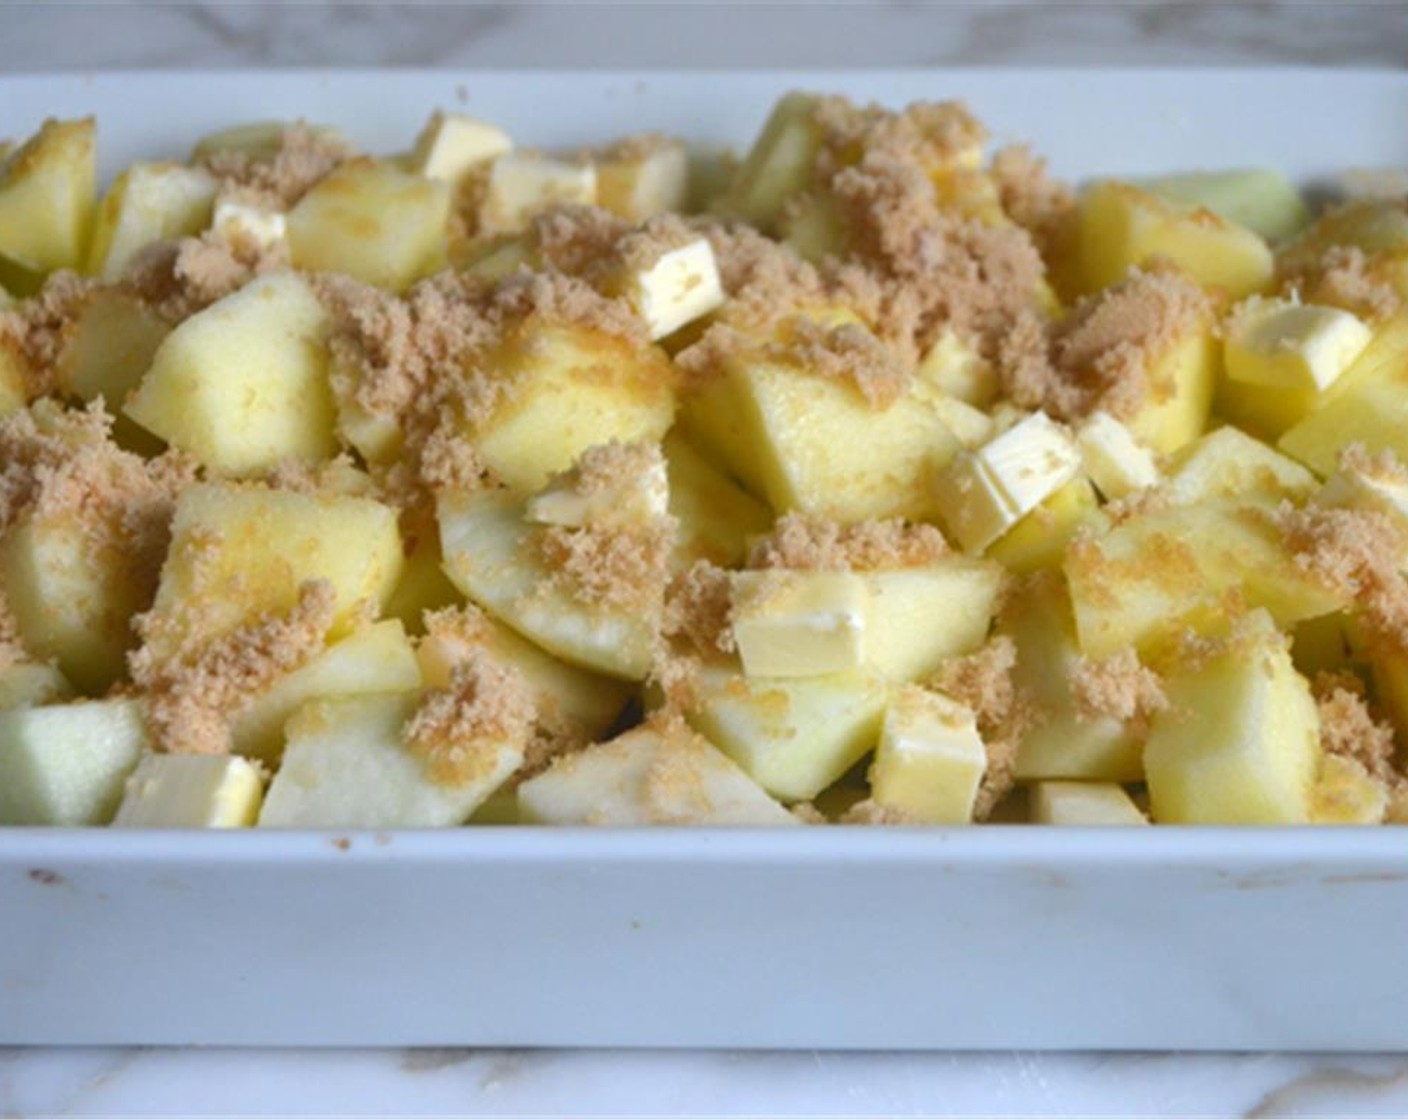 step 4 Place the apples in a 9x13-inch baking dish. Scatter the Brown Sugar (1/3 cup) and chunks of butter evenly over top.